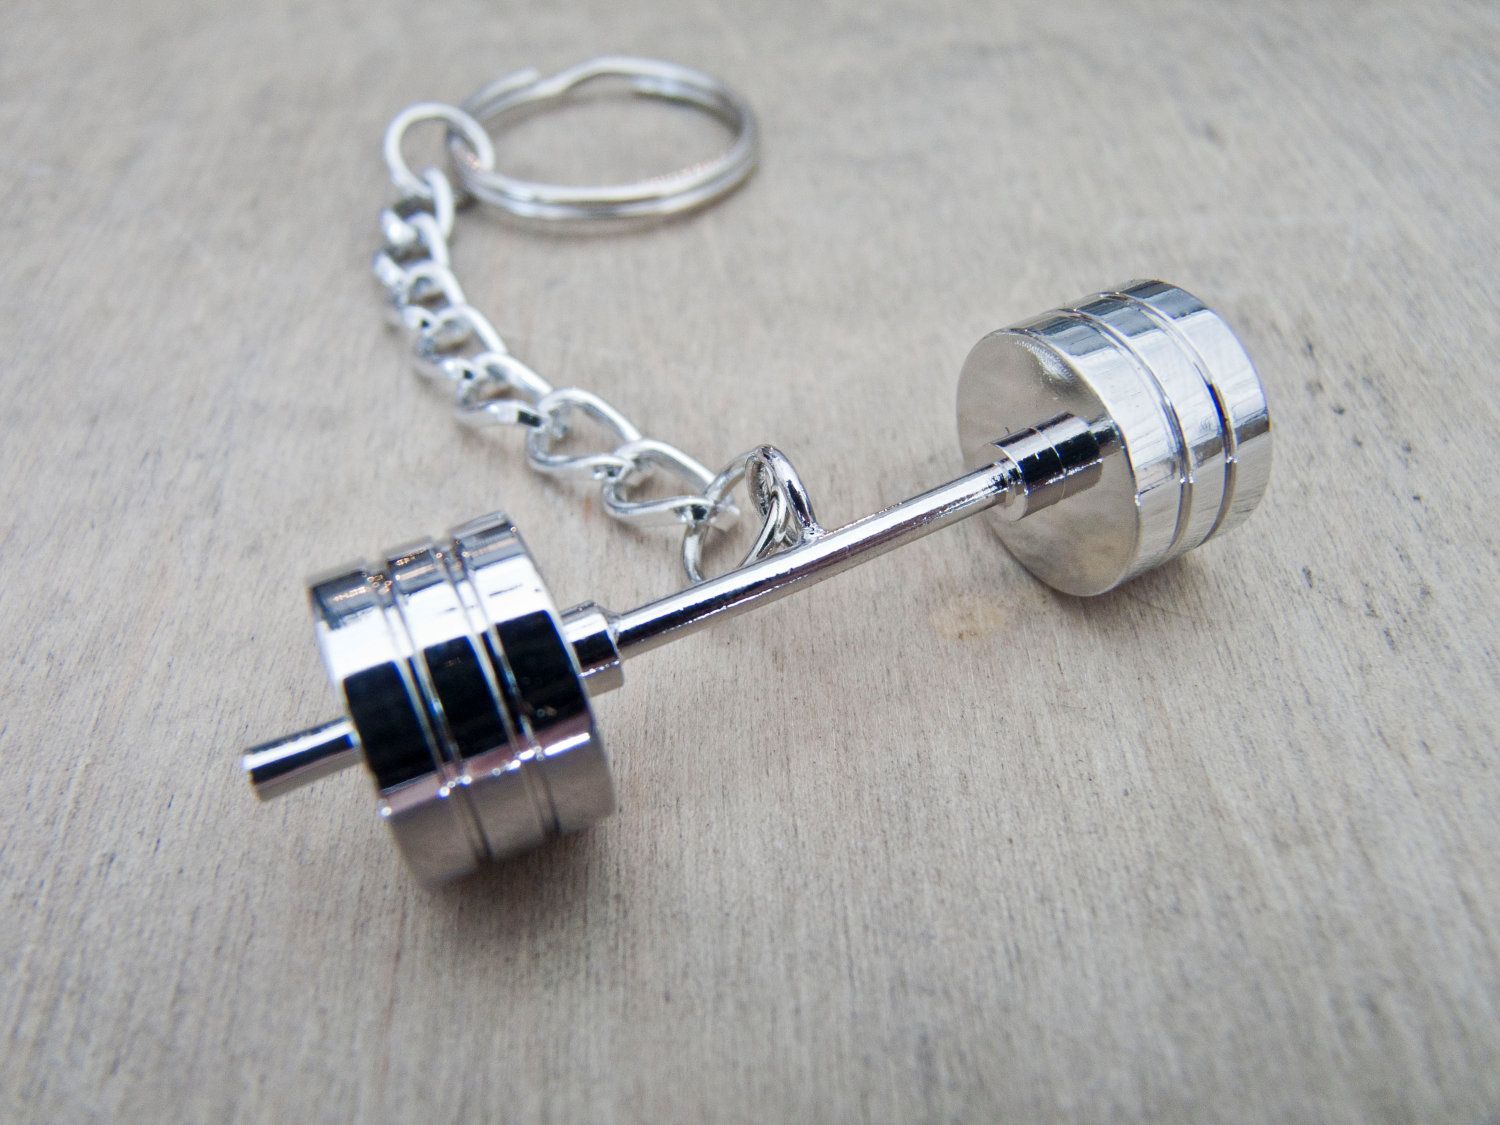 Detail Barbell Keychain Nomer 16